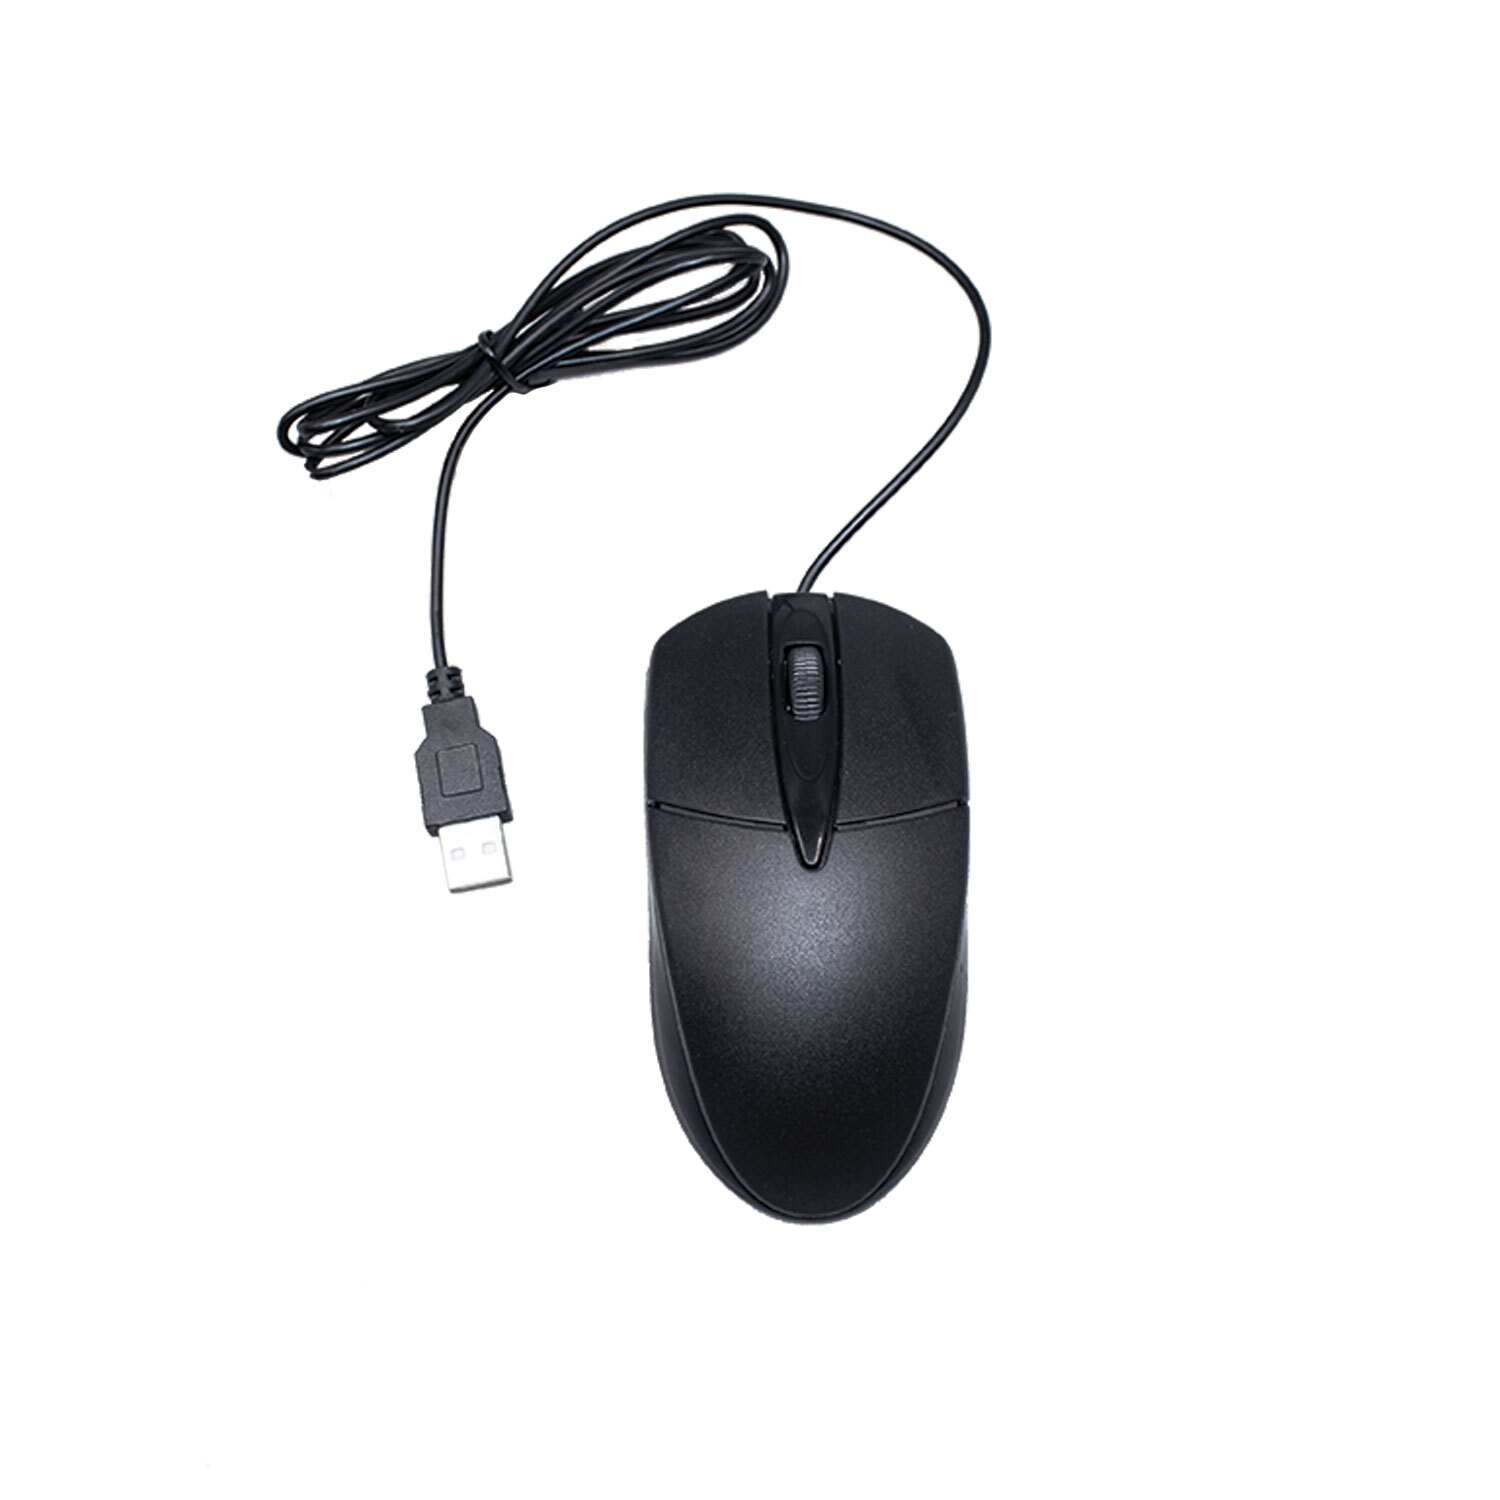 Wired Computer Mouse Image